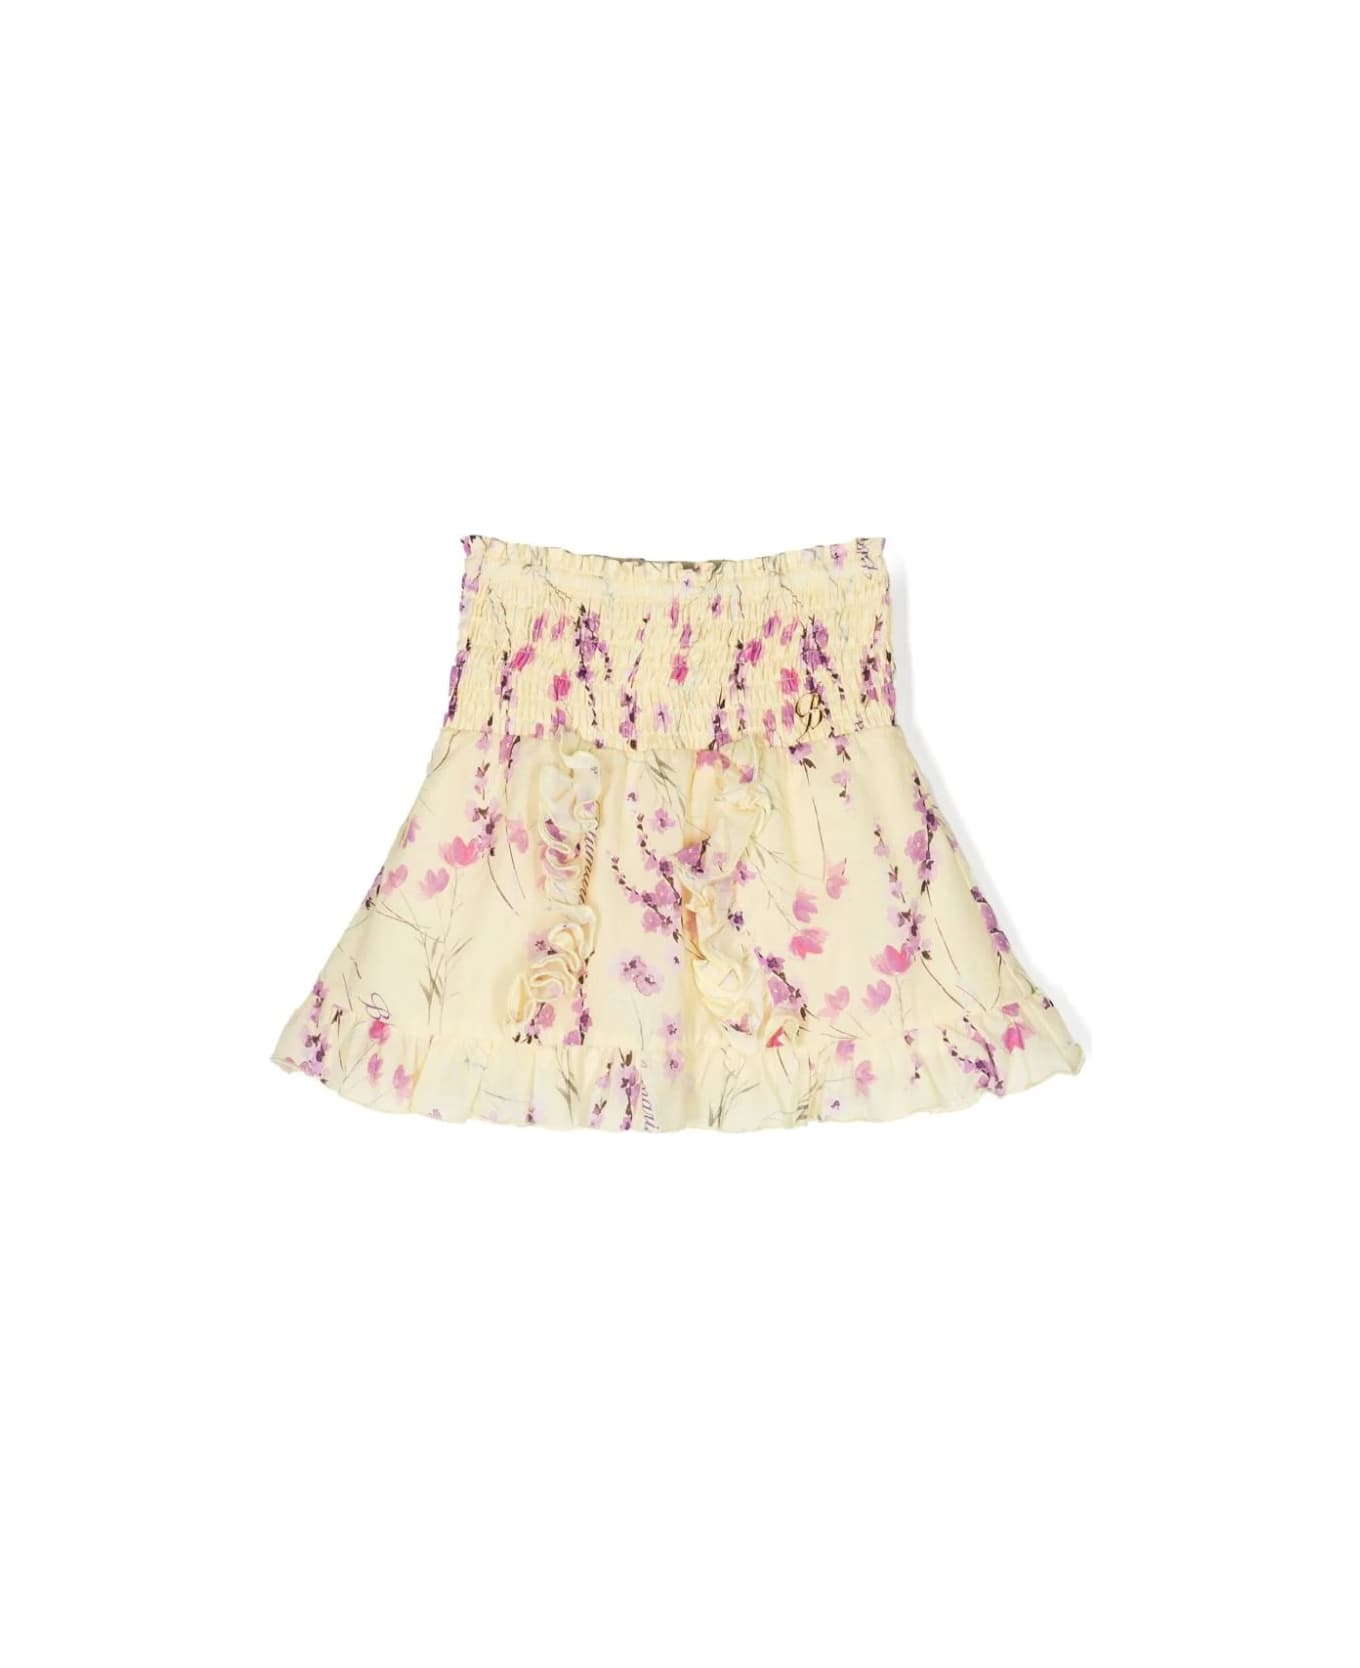 Miss Blumarine Pastel Yellow Miniskirt With Ruffles And Floral Print - Giallo ボトムス